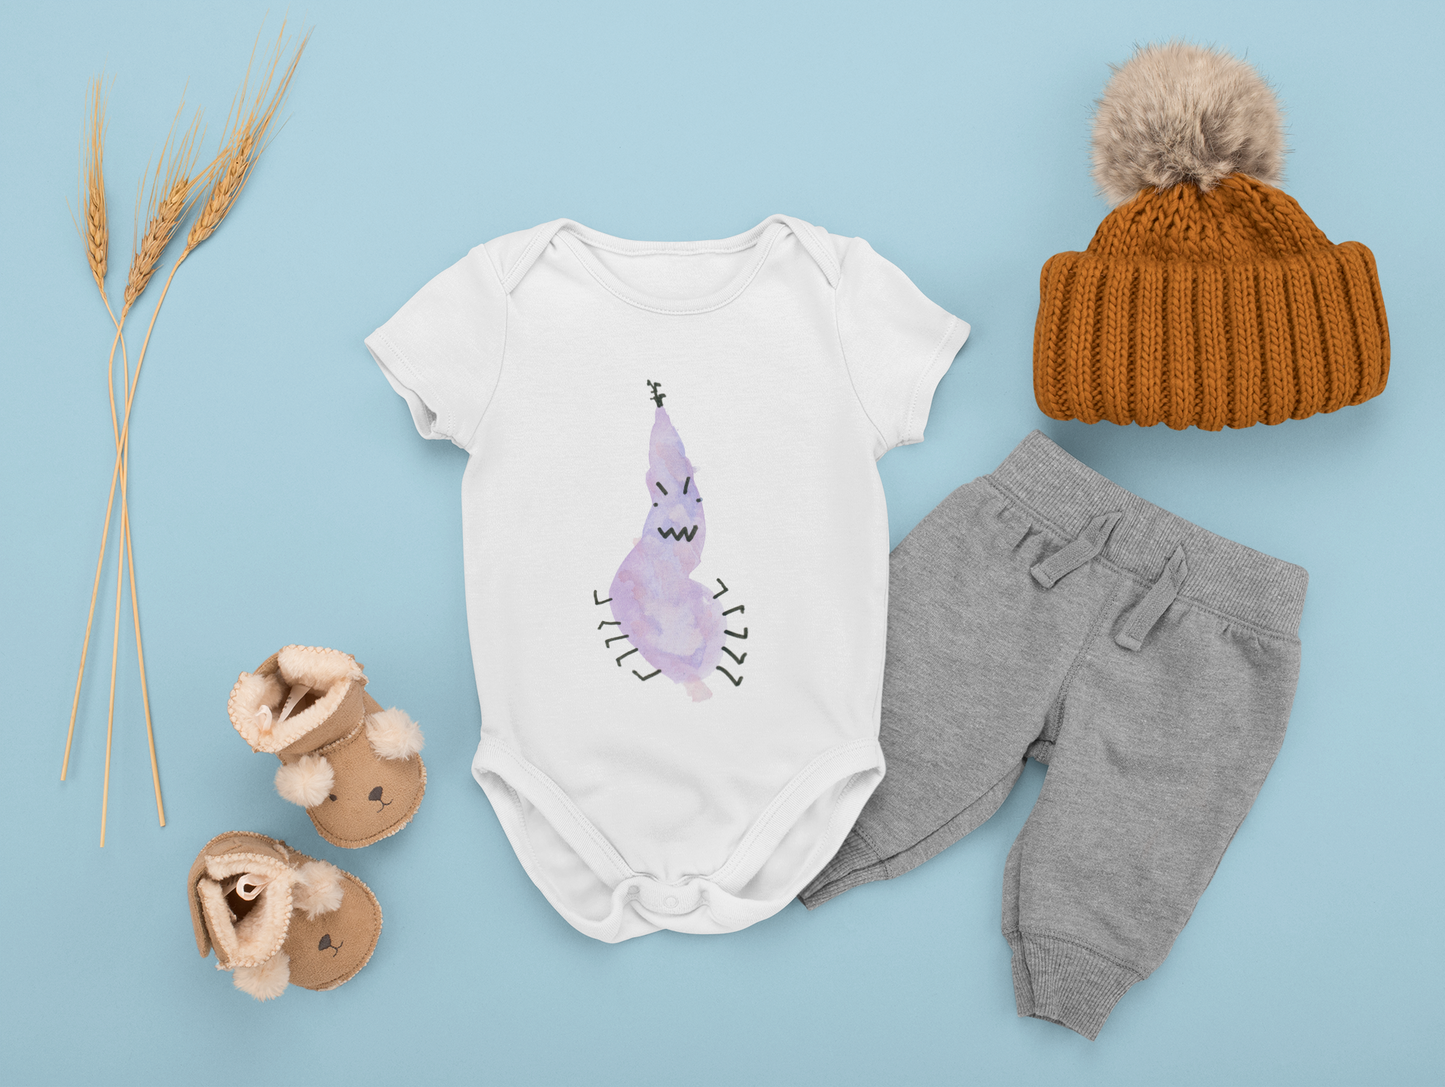 Organic Baby Bodysuit - Computer Worm with Cheeky Smile